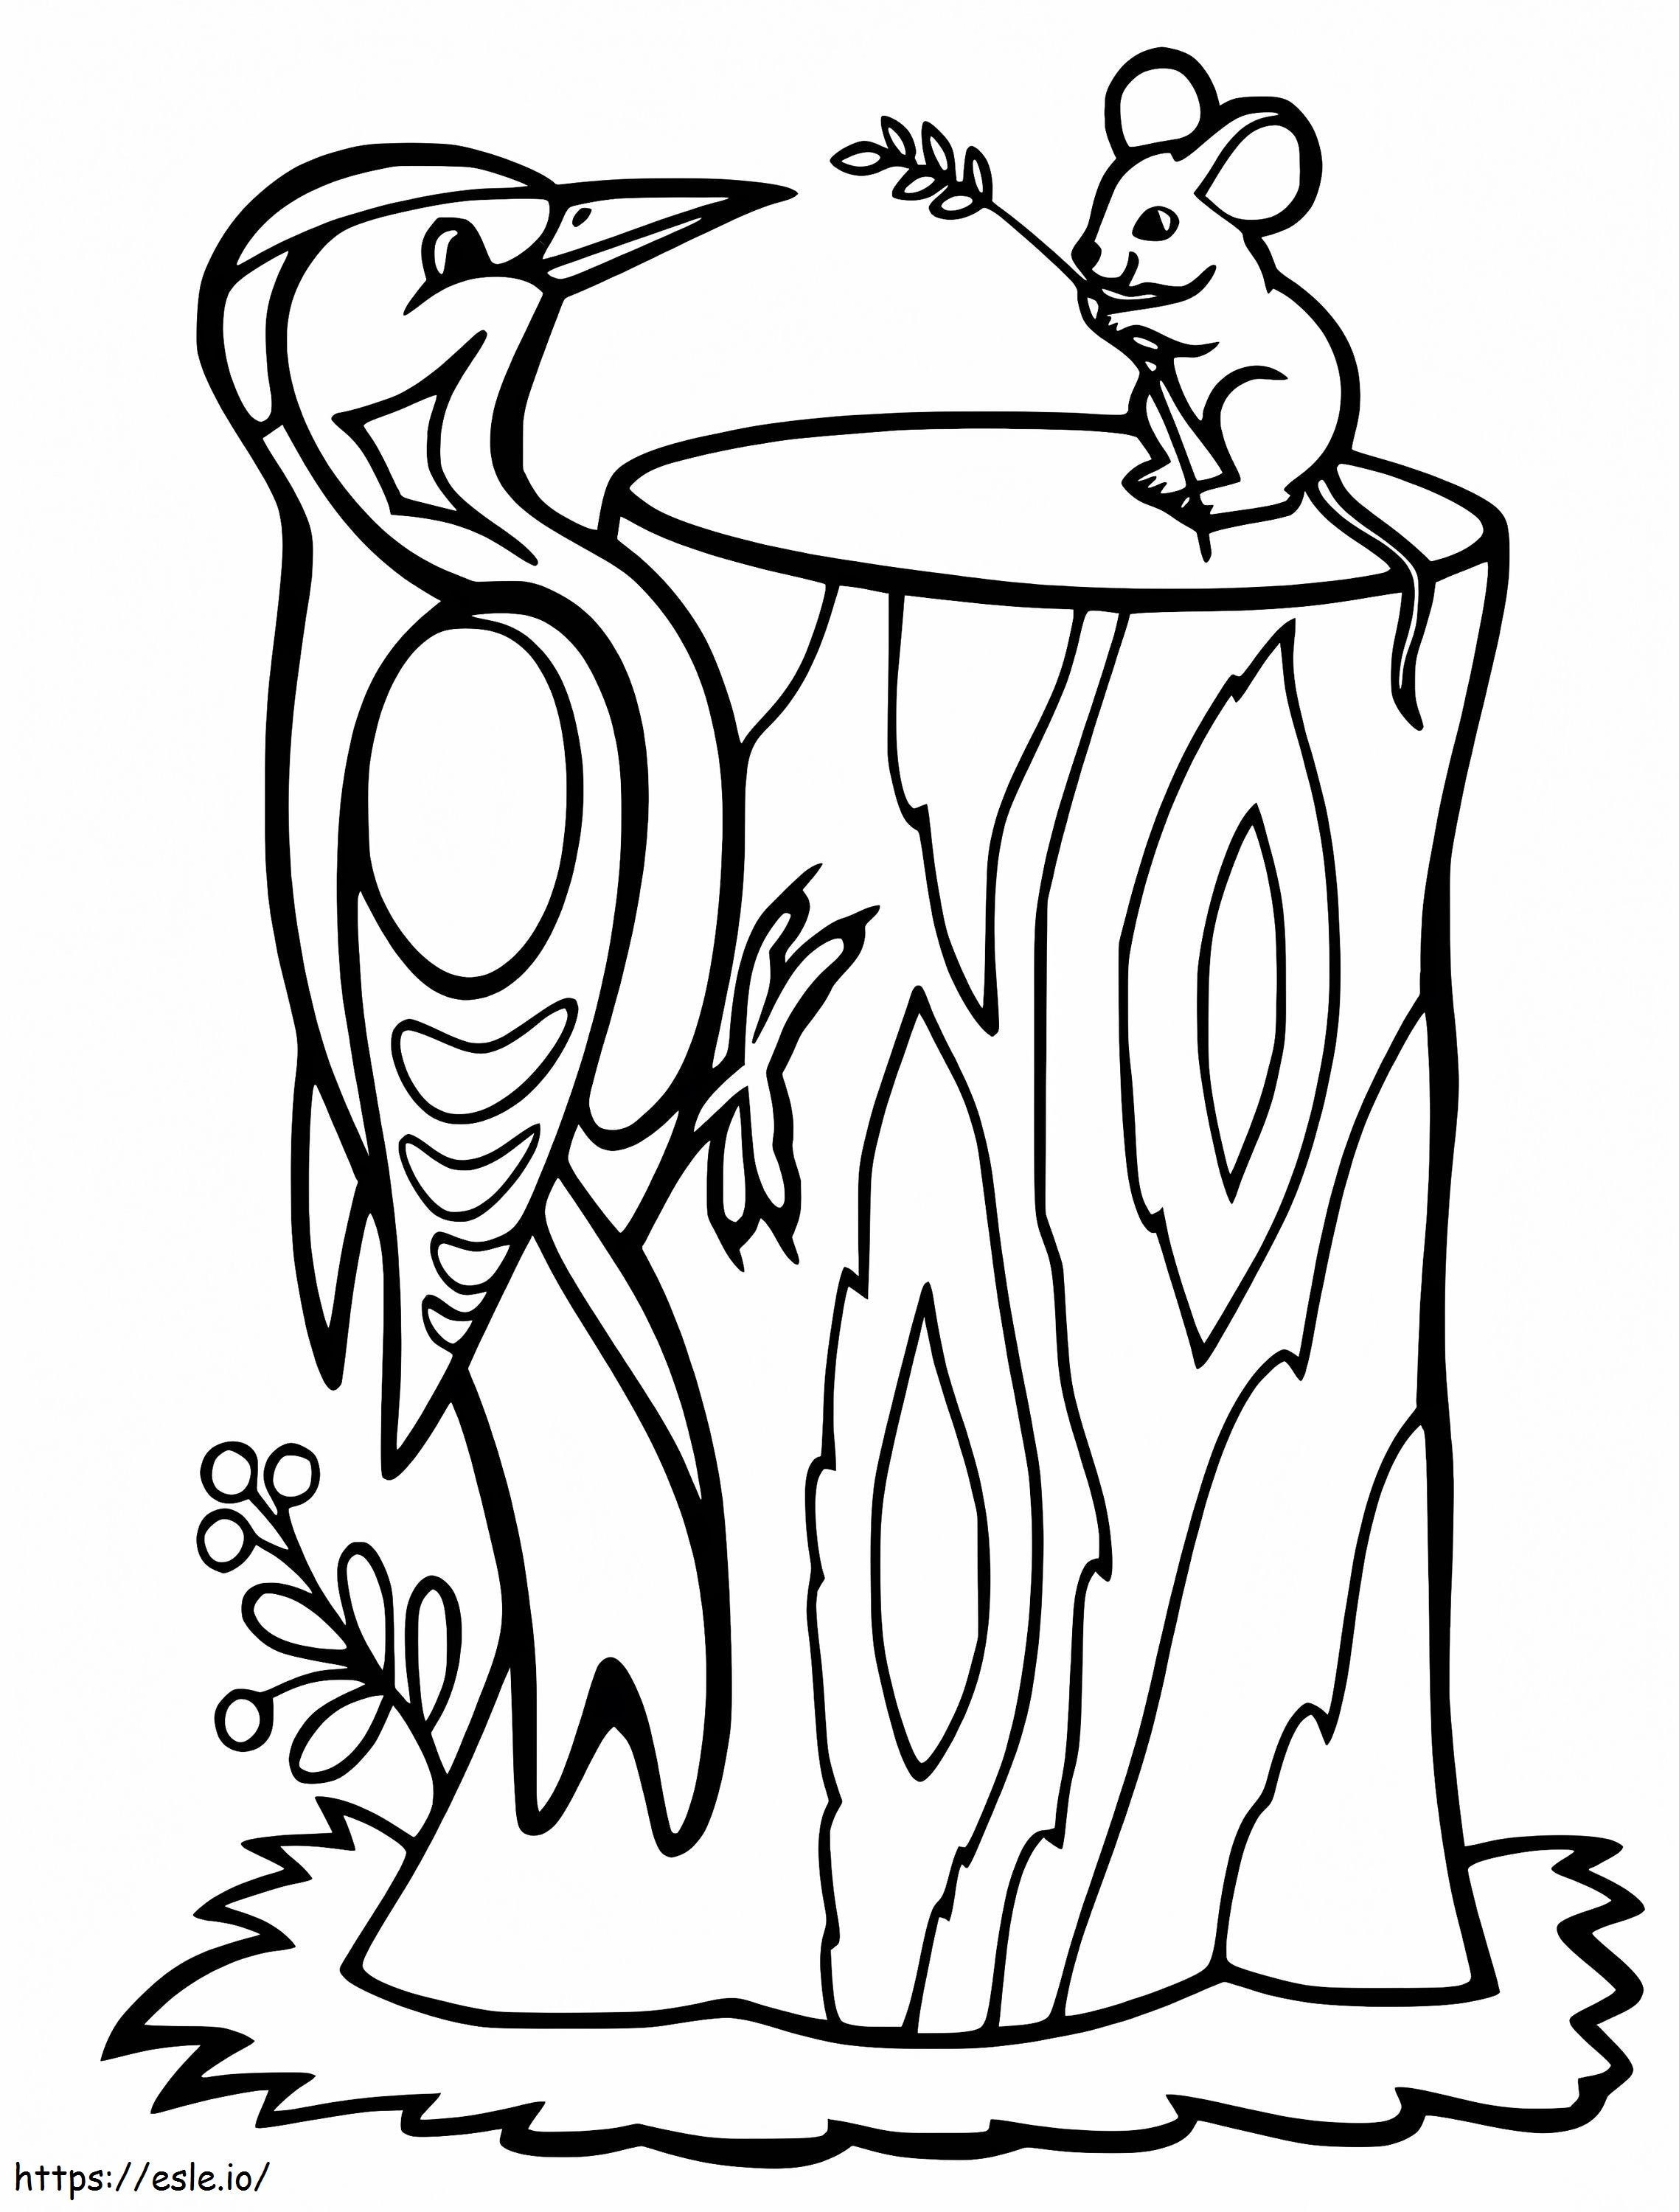 Woodpecker And Mouse coloring page